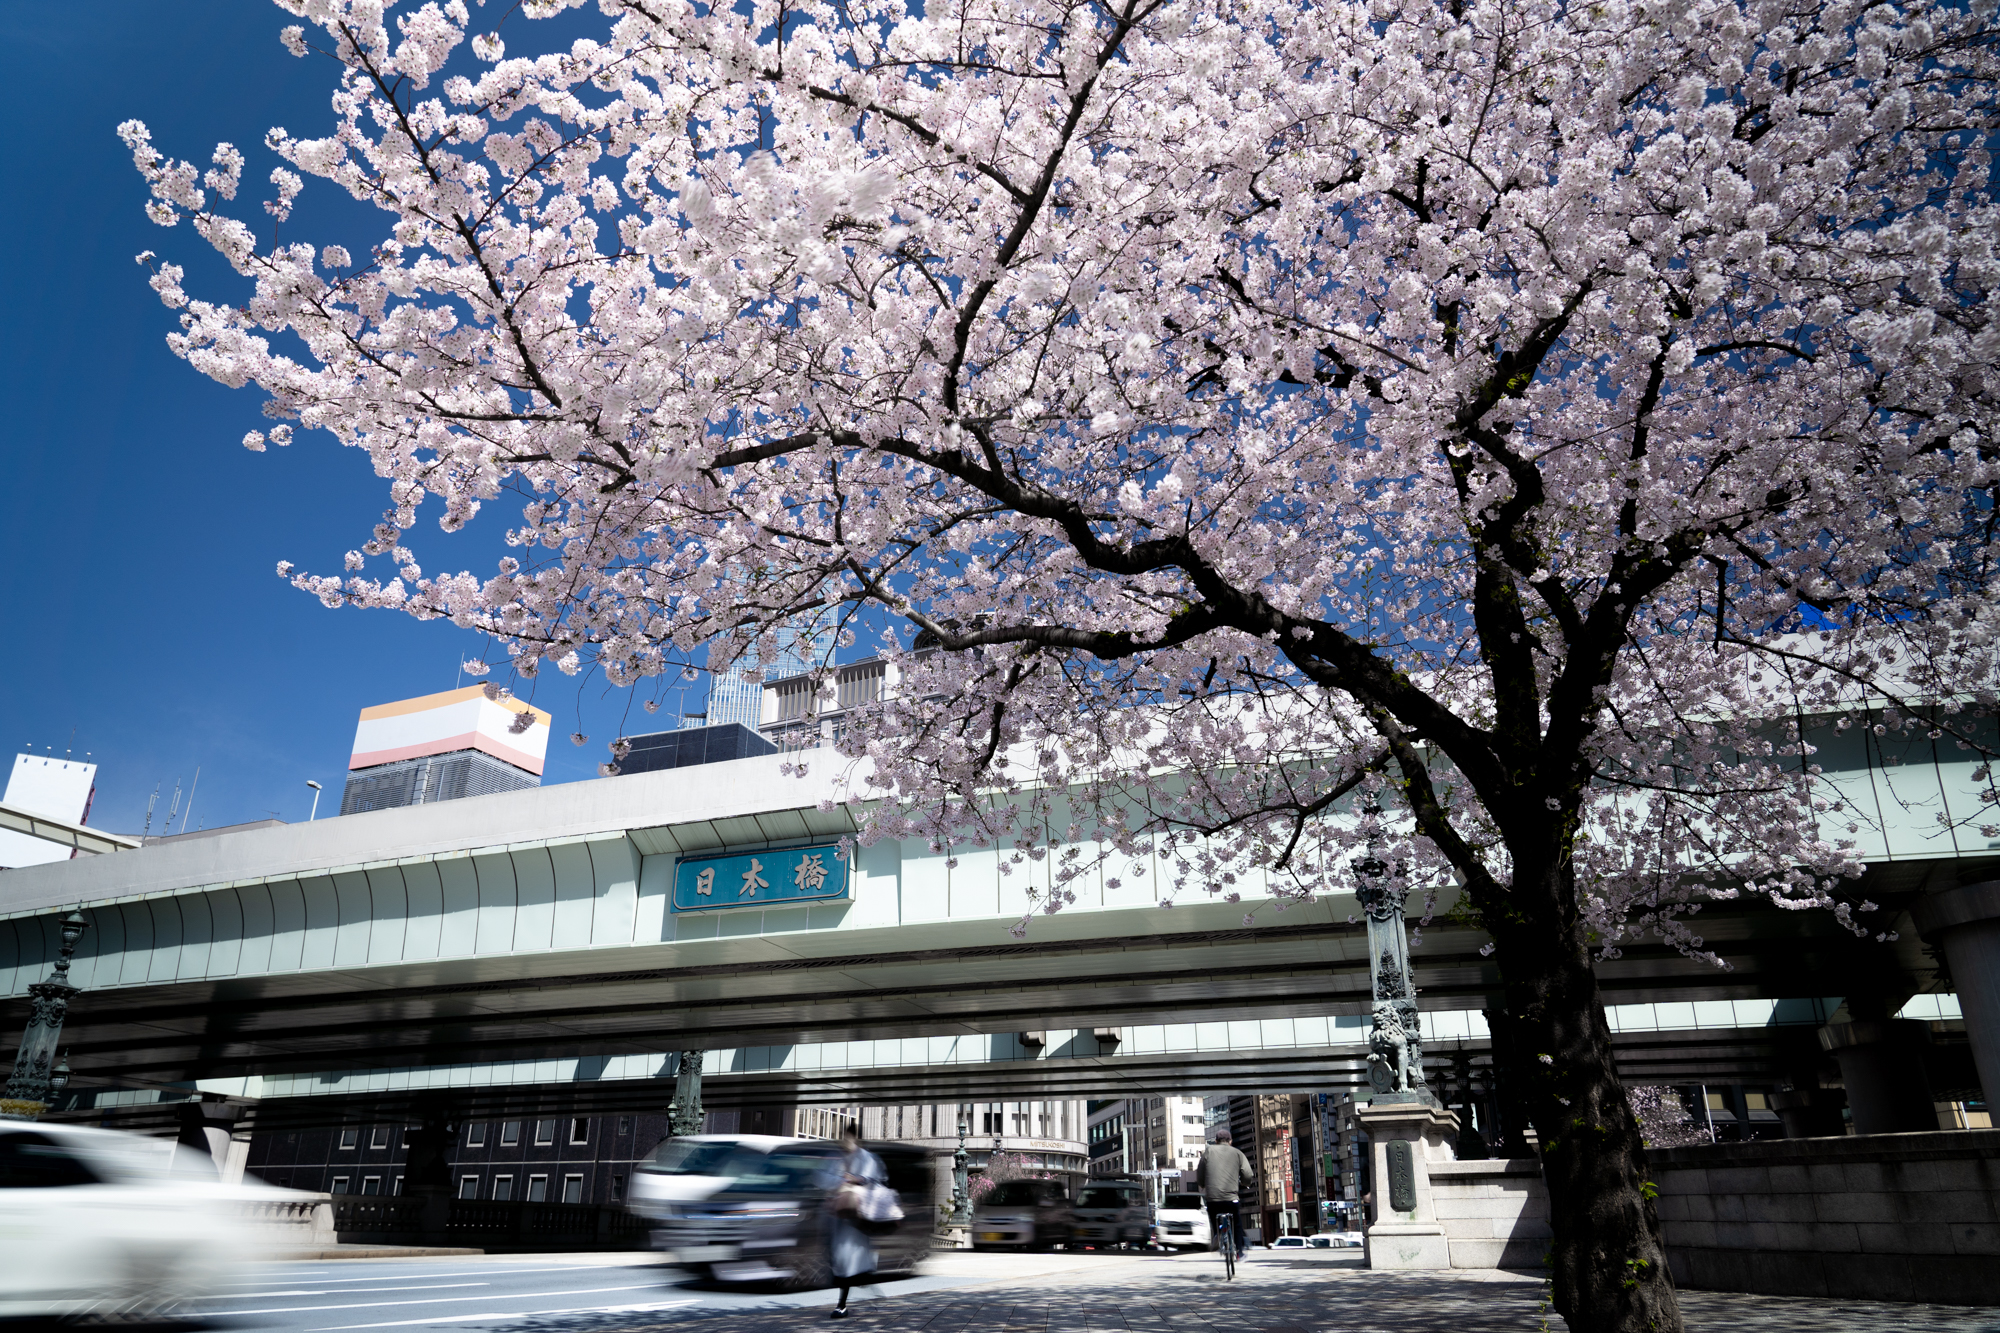 Japanese street with a blossoming tree